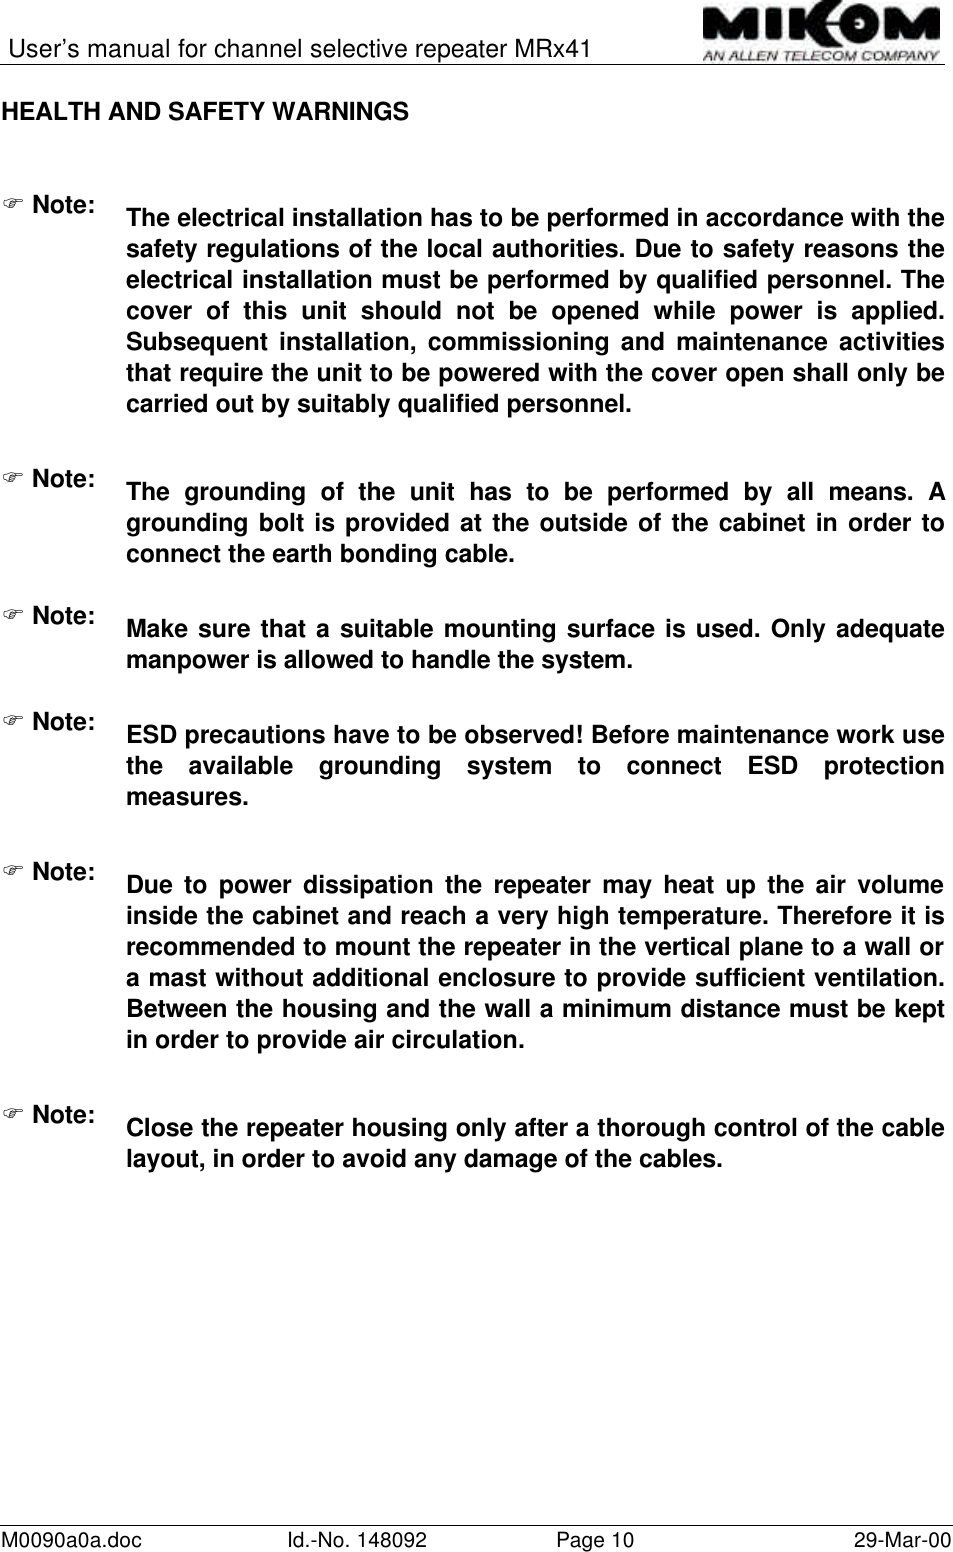 User’s manual for channel selective repeater MRx41M0090a0a.doc Id.-No. 148092 Page 10 29-Mar-00HEALTH AND SAFETY WARNINGSF Note: The electrical installation has to be performed in accordance with thesafety regulations of the local authorities. Due to safety reasons theelectrical installation must be performed by qualified personnel. Thecover of this unit should not be opened while power is applied.Subsequent installation, commissioning and maintenance activitiesthat require the unit to be powered with the cover open shall only becarried out by suitably qualified personnel.F Note:The grounding of the unit has to be performed by all means. Agrounding bolt is provided at the outside of the cabinet in order toconnect the earth bonding cable.F Note: Make sure that a suitable mounting surface is used. Only adequatemanpower is allowed to handle the system.F Note: ESD precautions have to be observed! Before maintenance work usethe available grounding system to connect ESD protectionmeasures.F Note: Due to power dissipation the repeater may heat up the air volumeinside the cabinet and reach a very high temperature. Therefore it isrecommended to mount the repeater in the vertical plane to a wall ora mast without additional enclosure to provide sufficient ventilation.Between the housing and the wall a minimum distance must be keptin order to provide air circulation.F Note: Close the repeater housing only after a thorough control of the cablelayout, in order to avoid any damage of the cables.